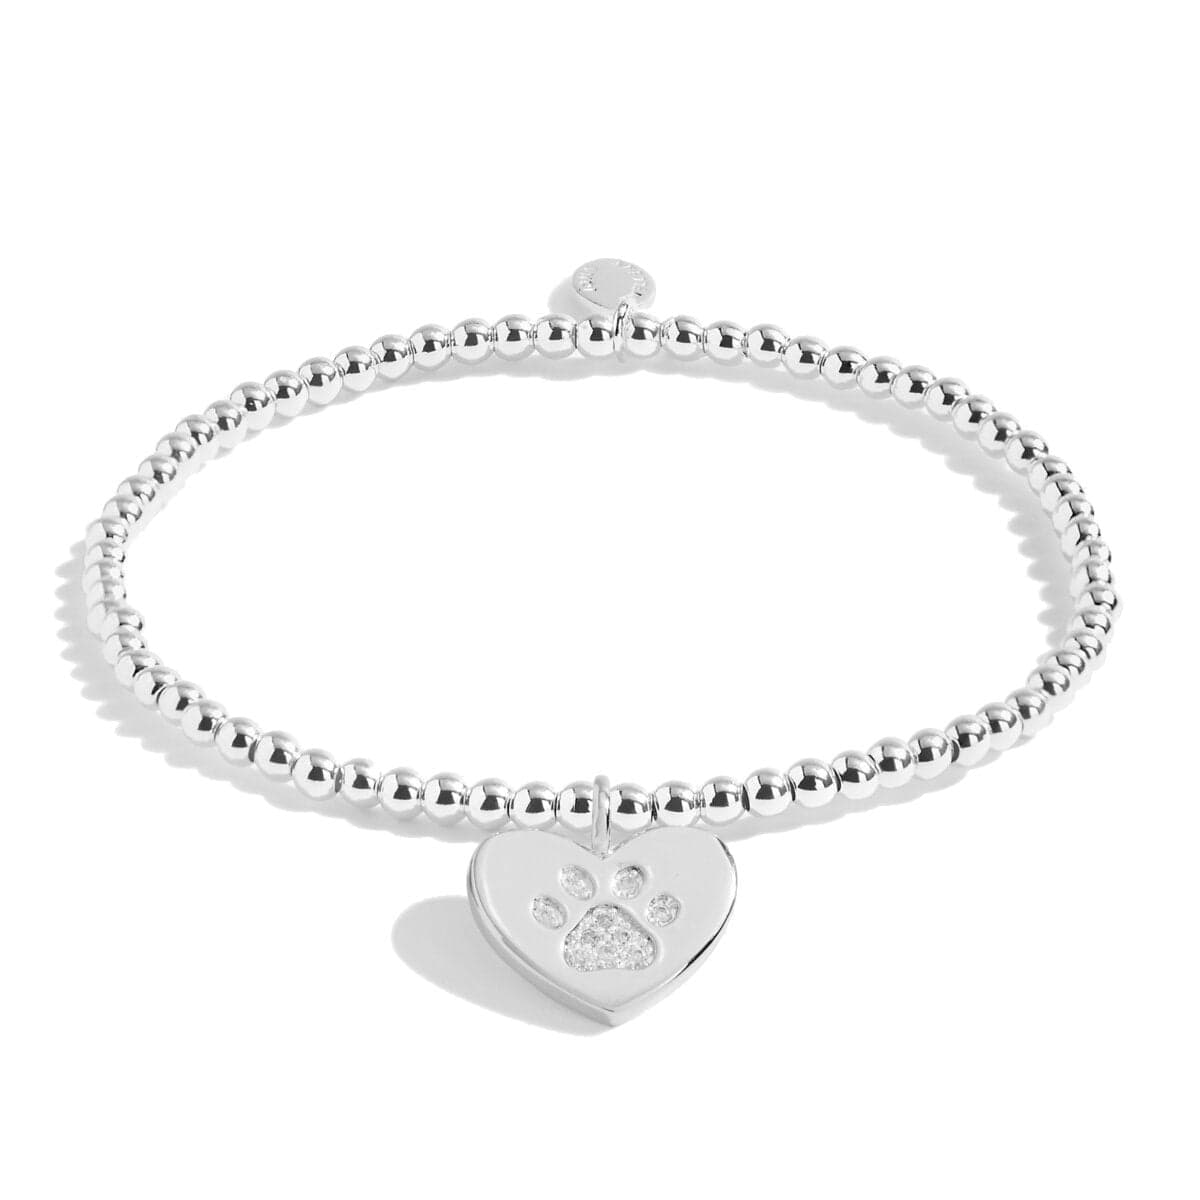 Joma Jewellery Bracelets Joma Jewellery Bracelet - A little Sorry for your loss (Dog / Cat / Pet)